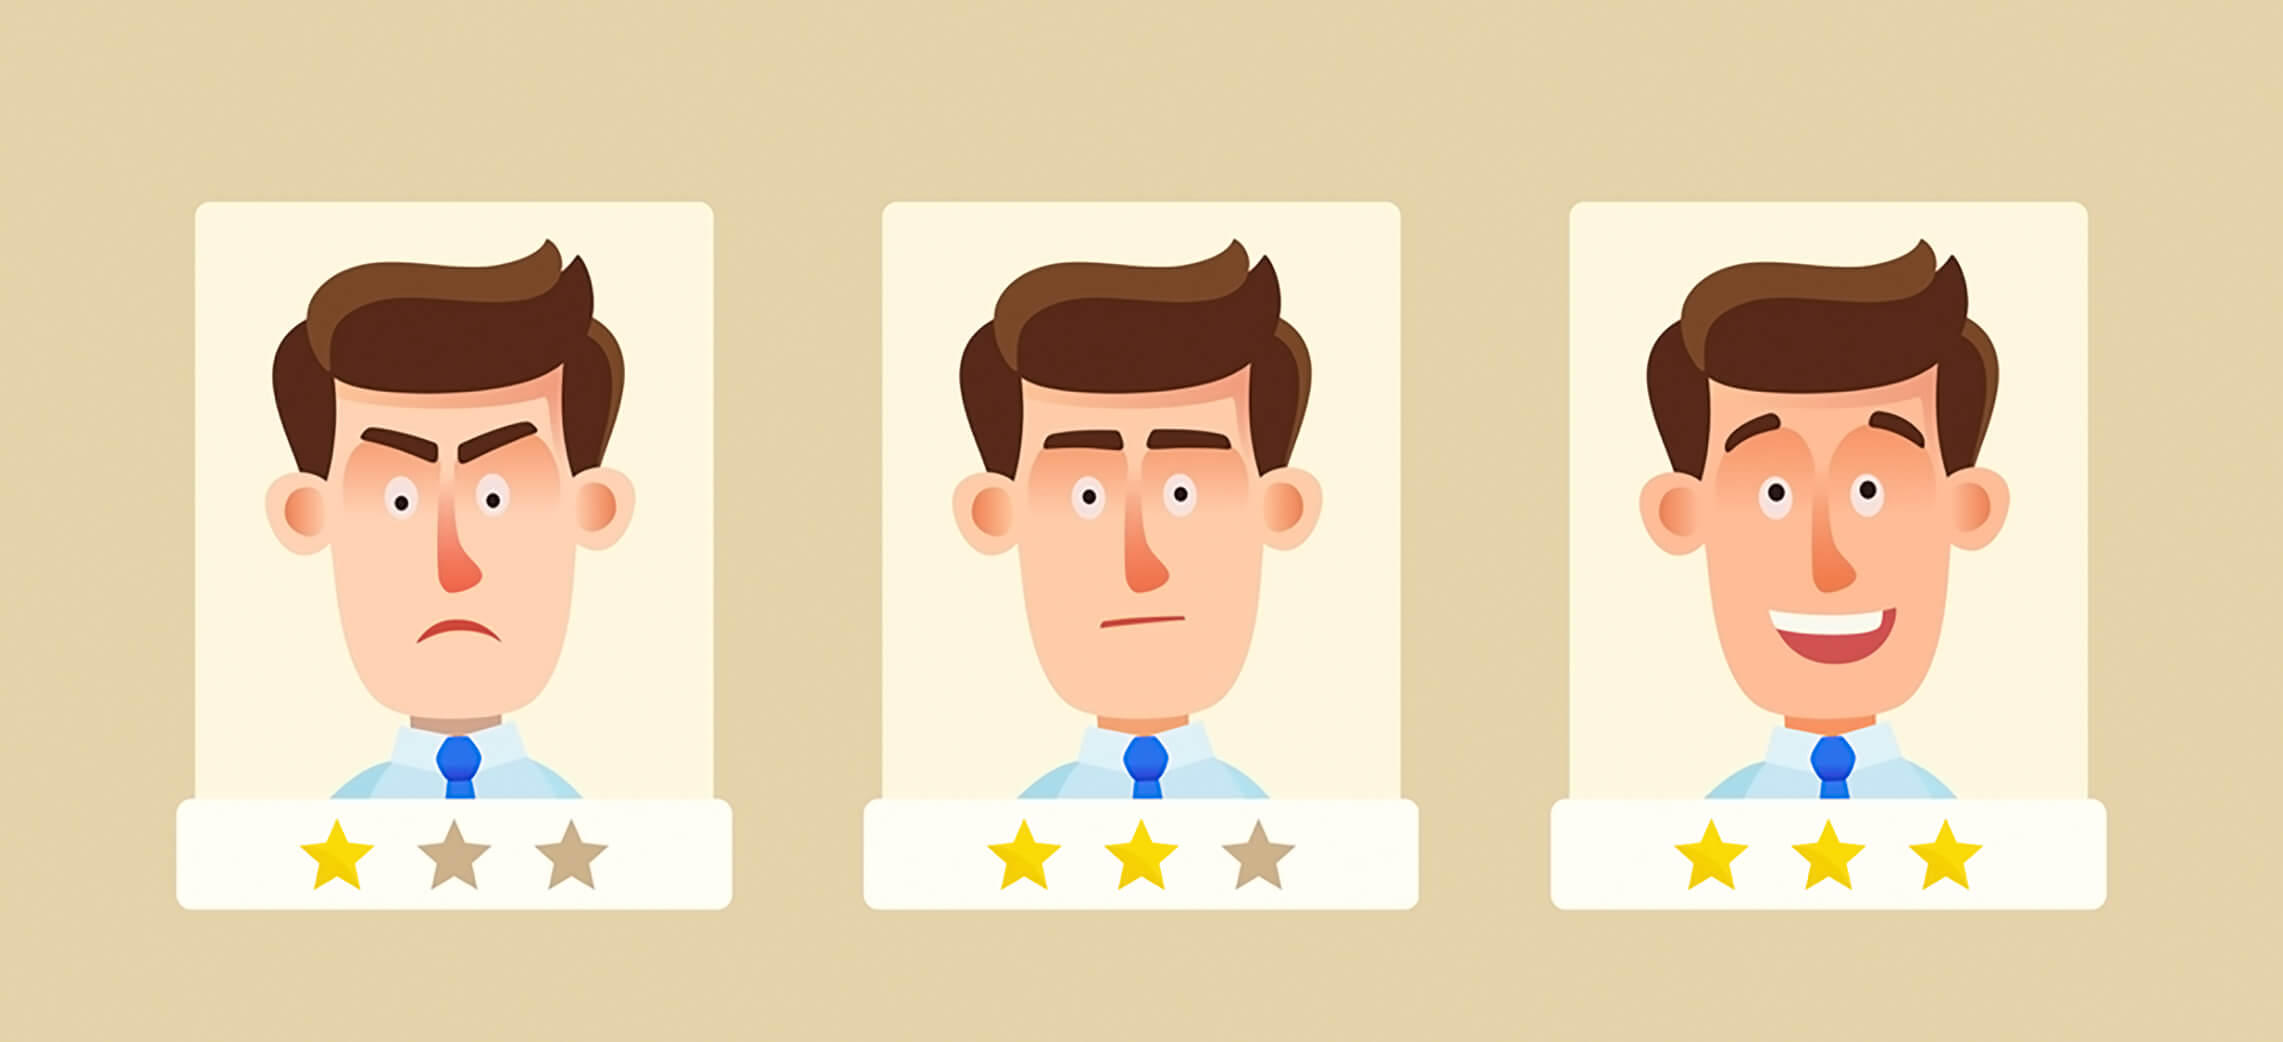 11 expert tips on how should you deal with angry customers